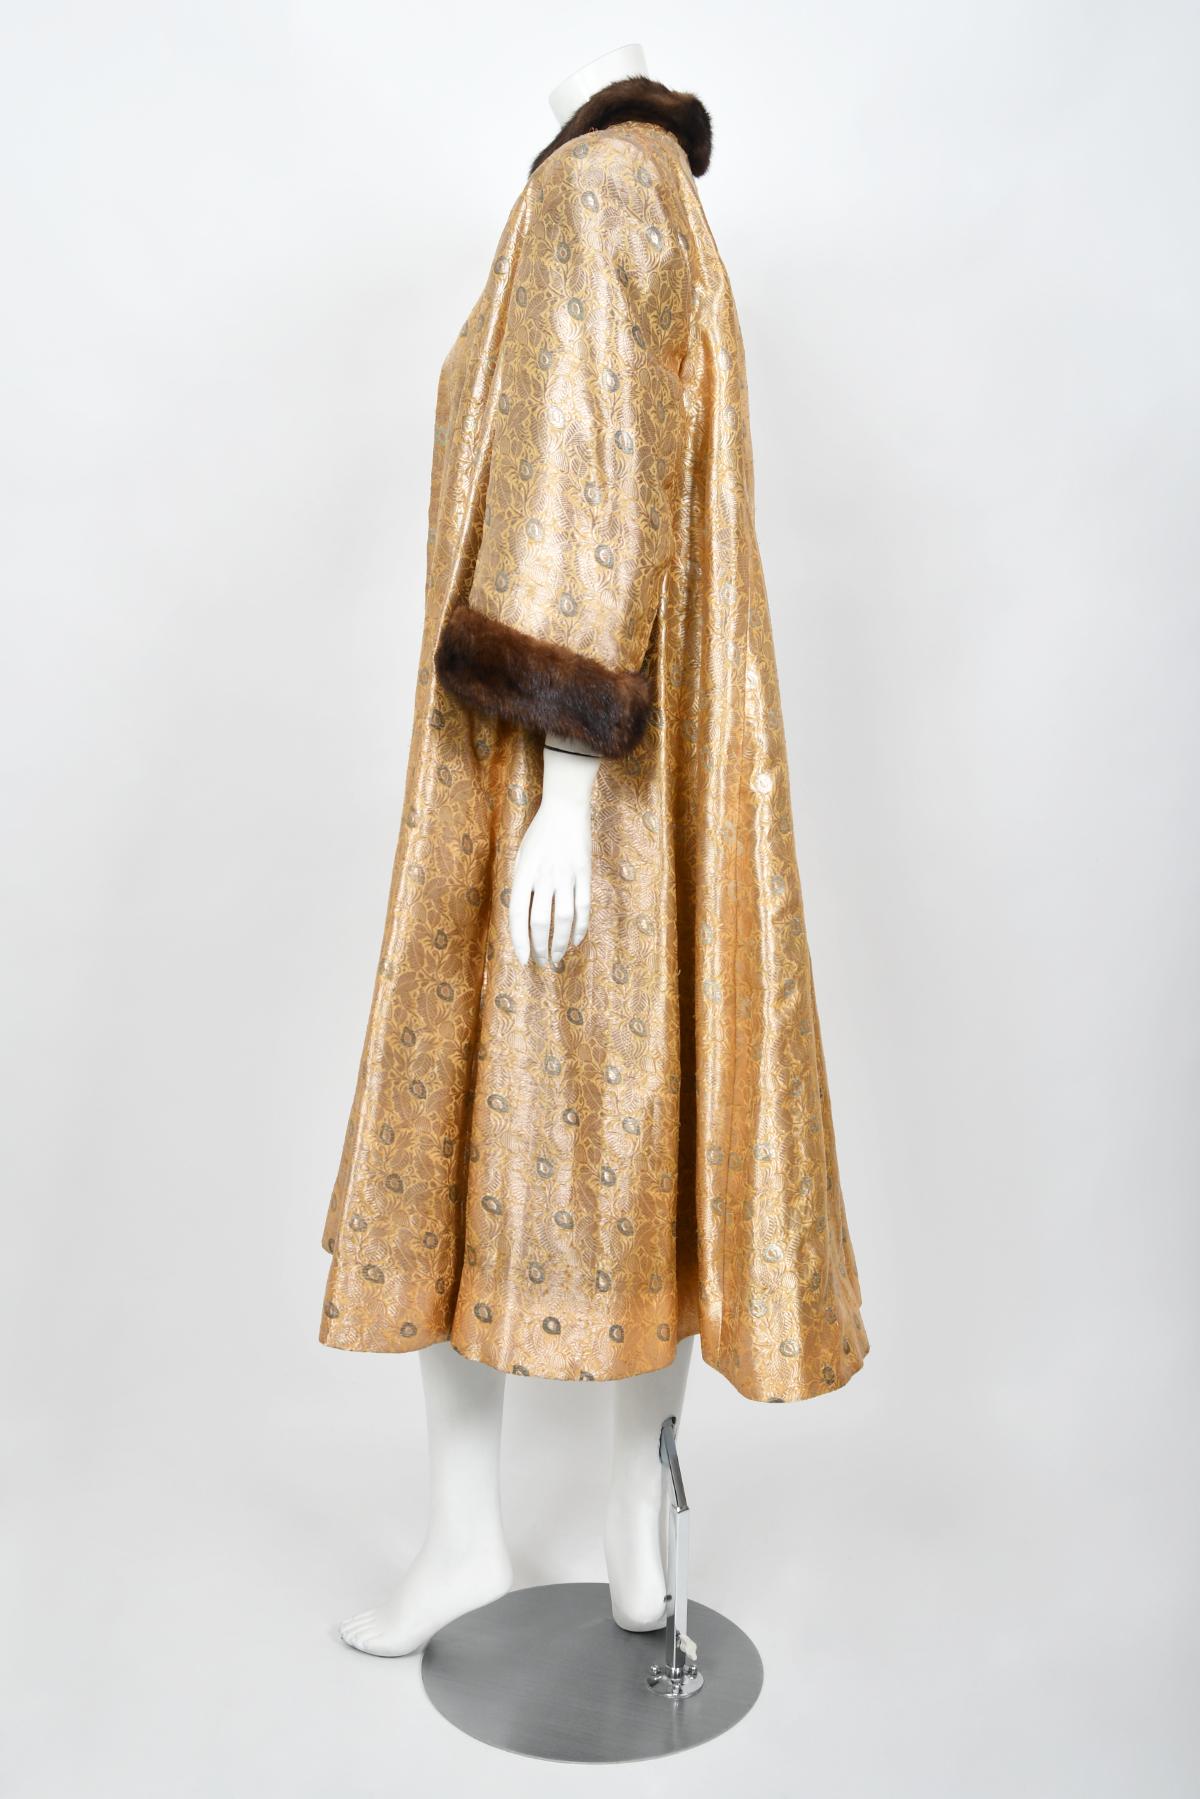 1949 Traina-Norell Couture Vogue Documented Metallic Gold Silk & Mink Swing Coat For Sale 5